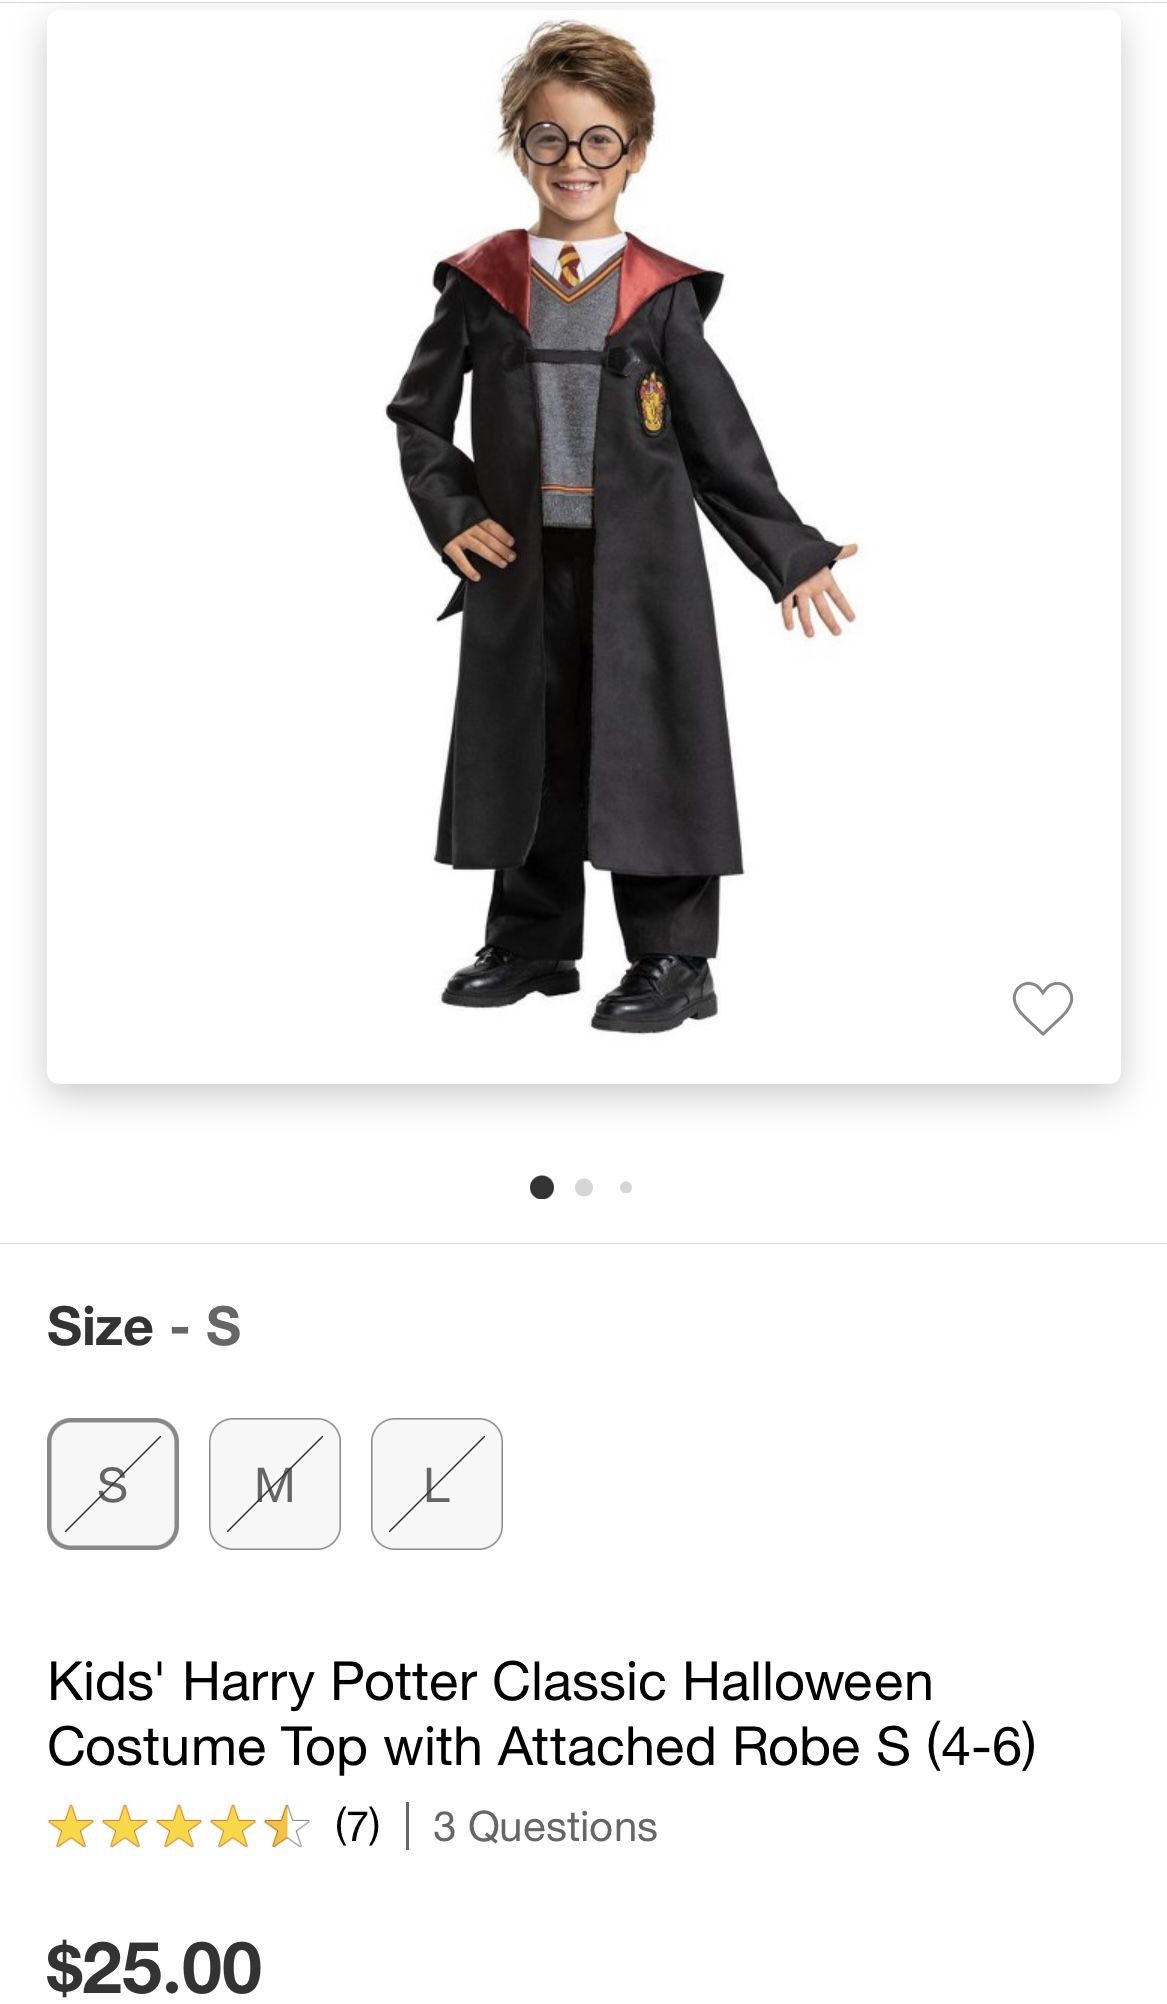 Target Kids’ Harry Potter Classic Halloween Costume Top with Attached Robe S (4-6) and Amazon Harry Potter Accessories Set, Costume Wand & Glasses